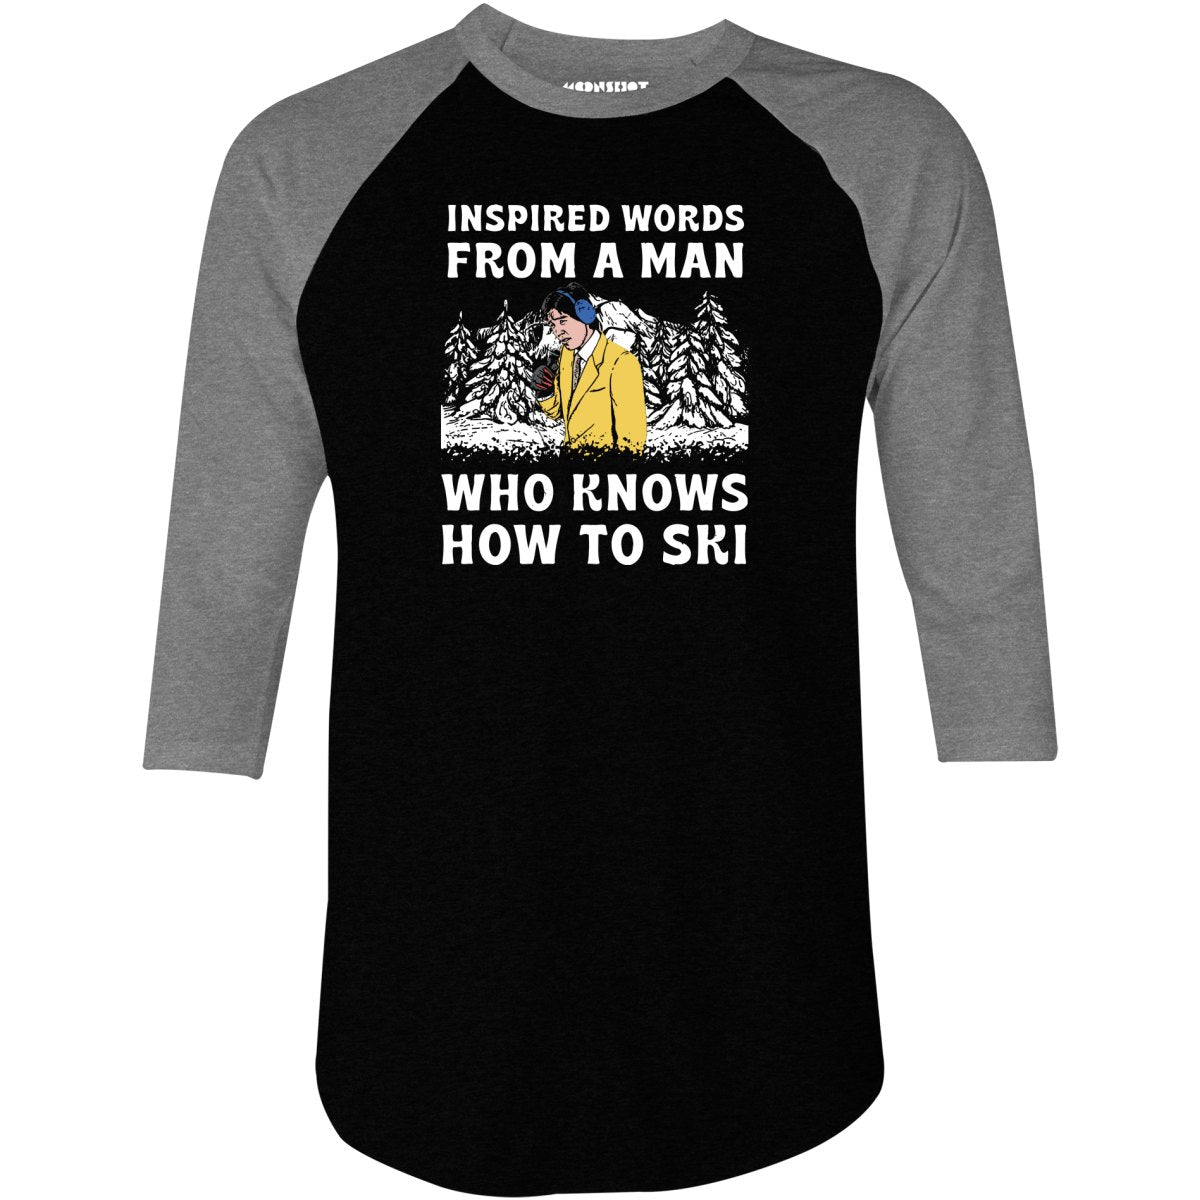 Inspired Words From a Man Who Knows How to Ski - 3/4 Sleeve Raglan T-Shirt